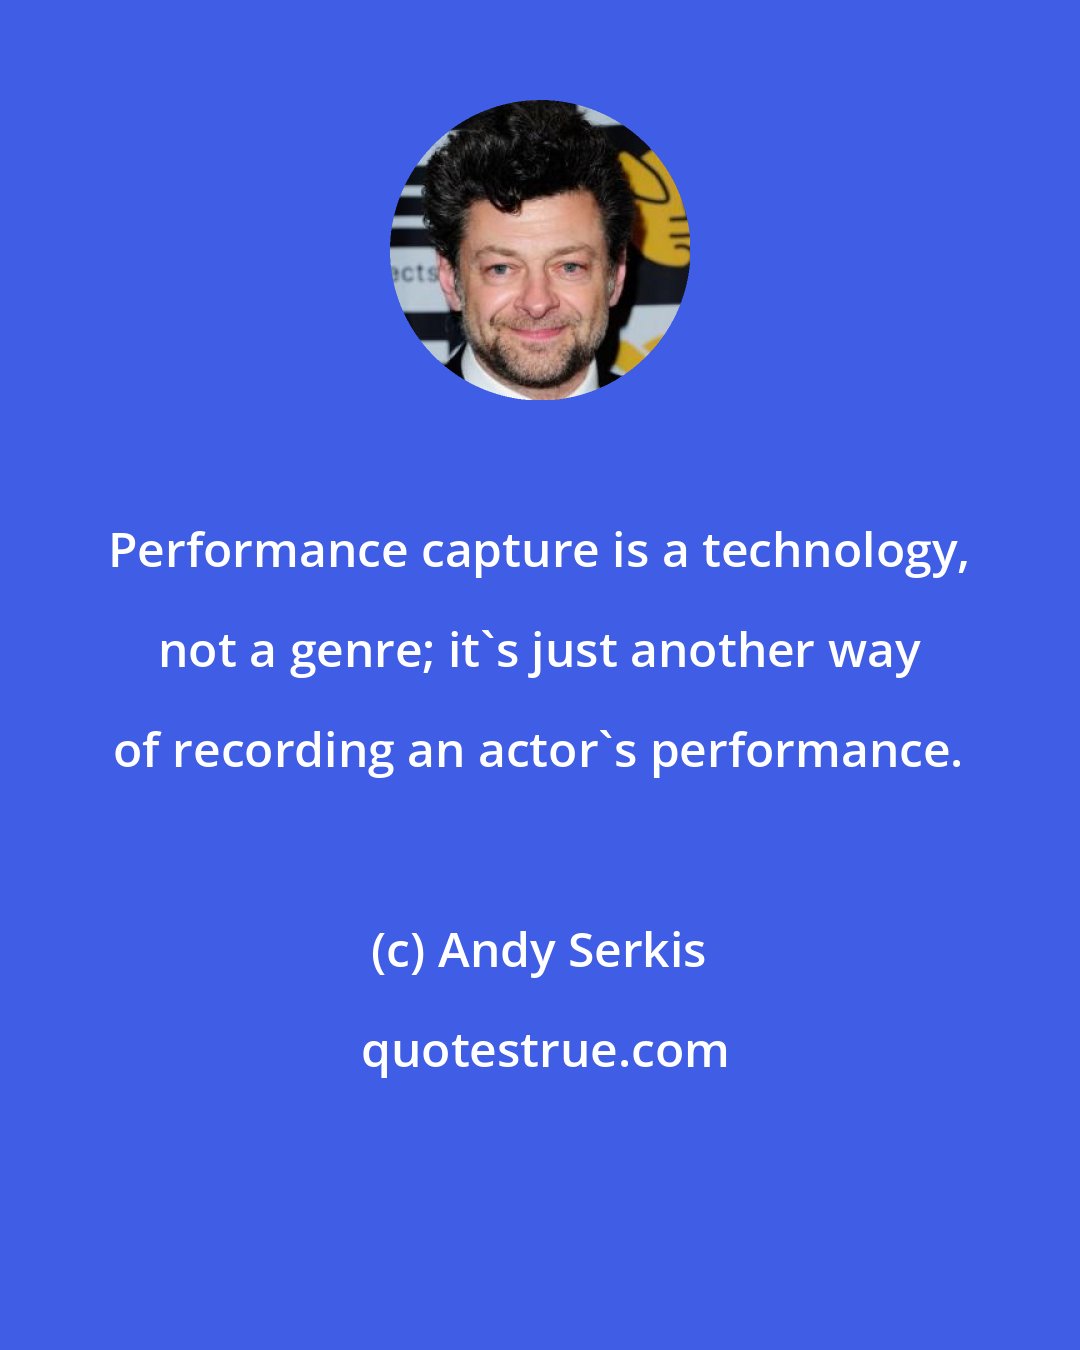 Andy Serkis: Performance capture is a technology, not a genre; it's just another way of recording an actor's performance.